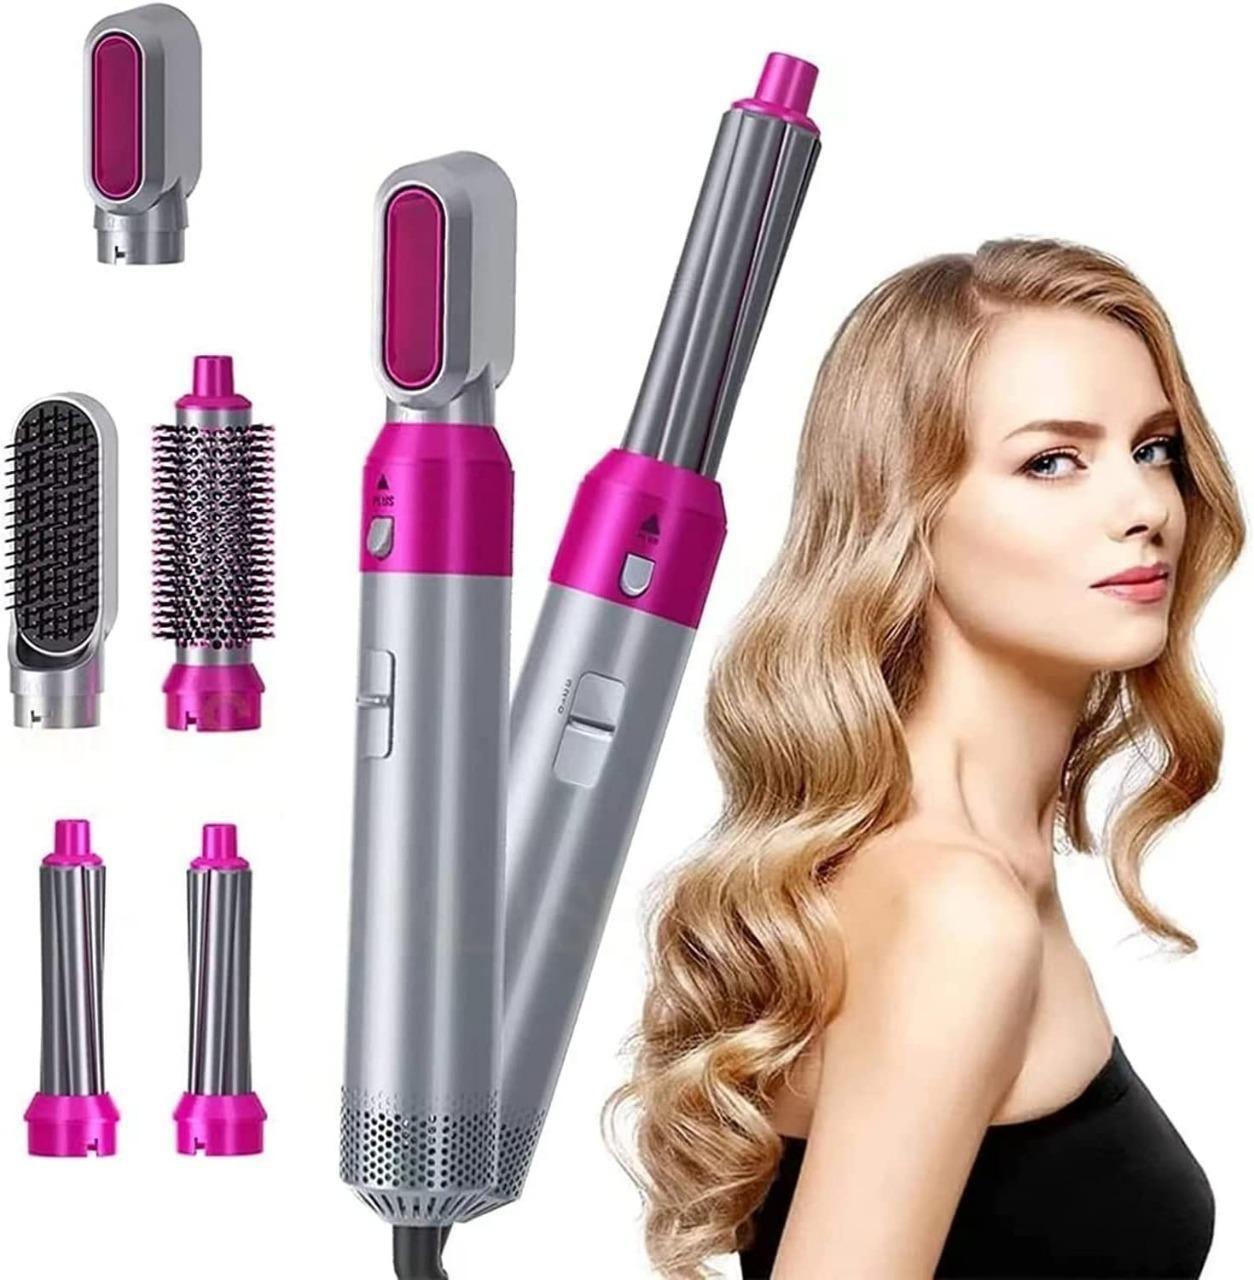 Transform Your Hair Styling Game with the 5-in-1 Hair Curler, Straightener, Dryer, and Hot Hair Comb